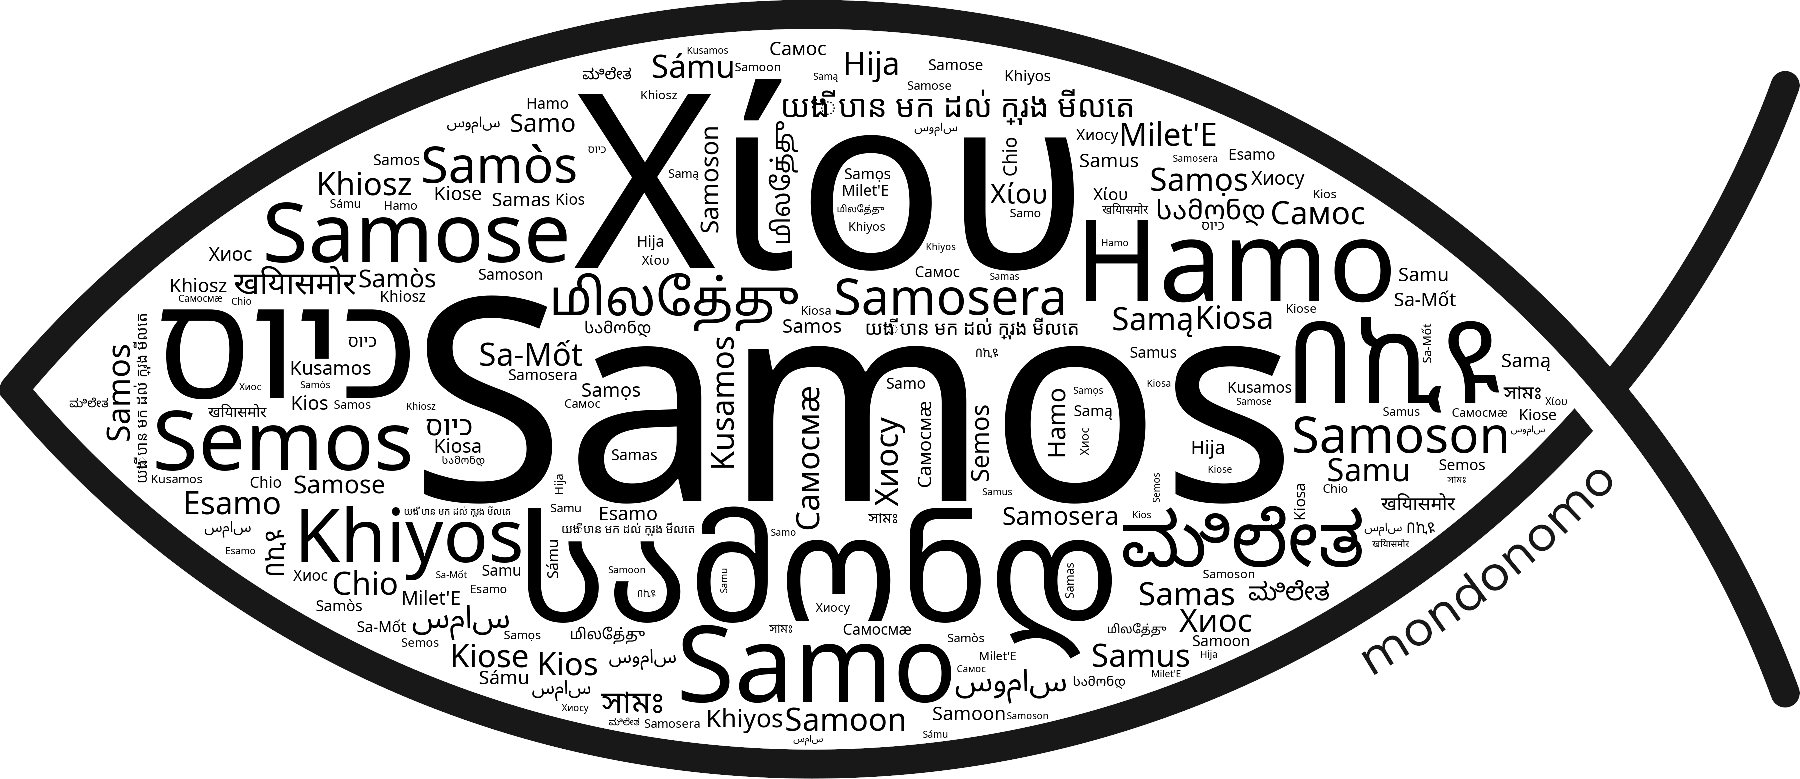 Name Samos in the world's Bibles